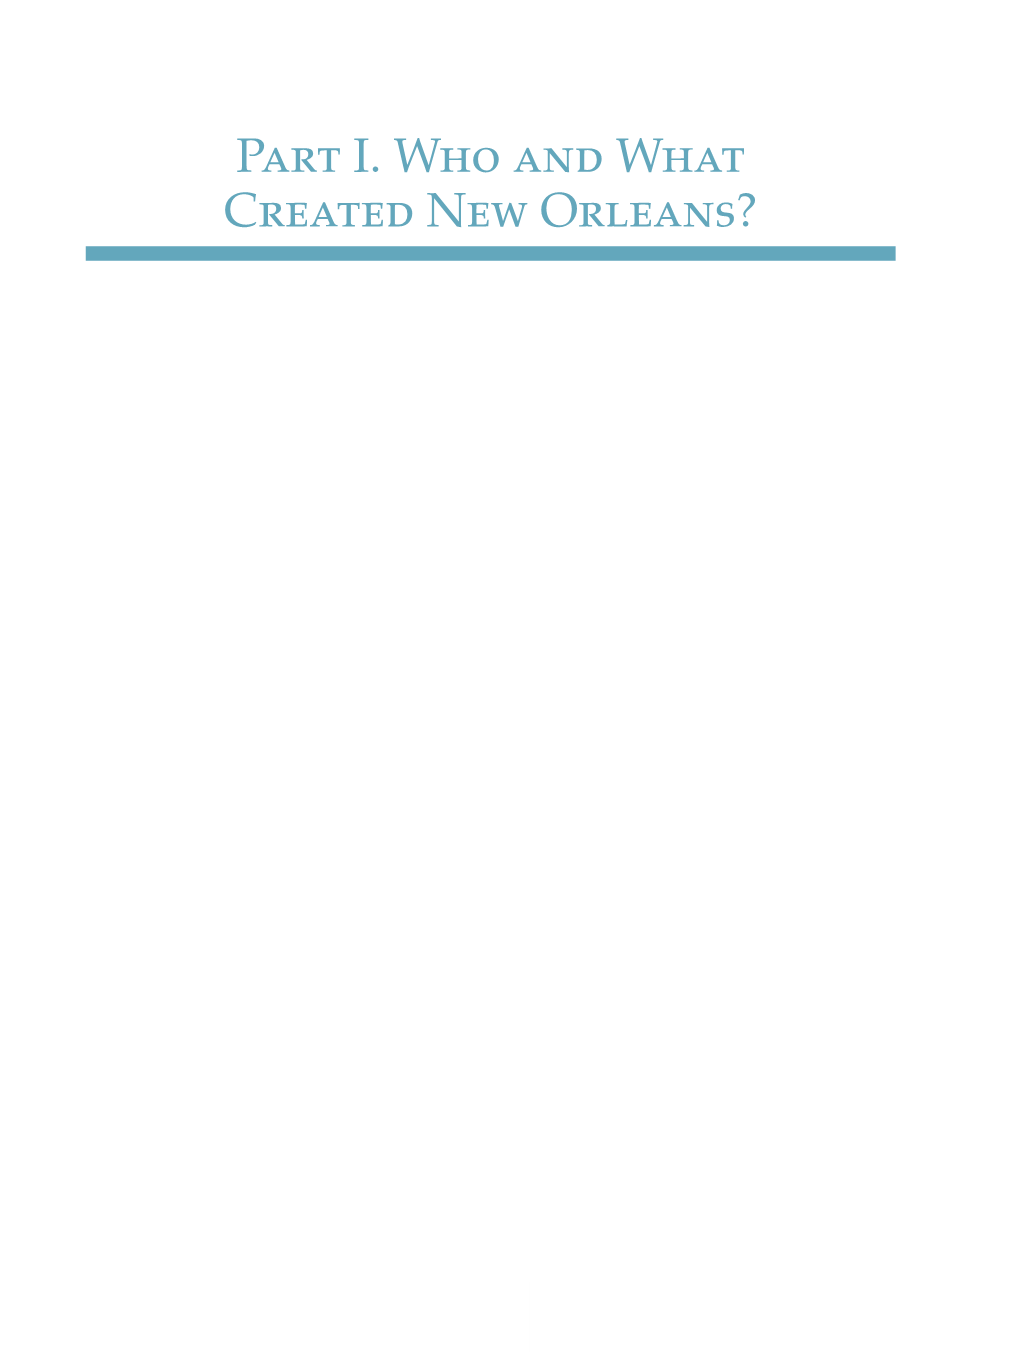 Part I. Who and What Created New Orleans?